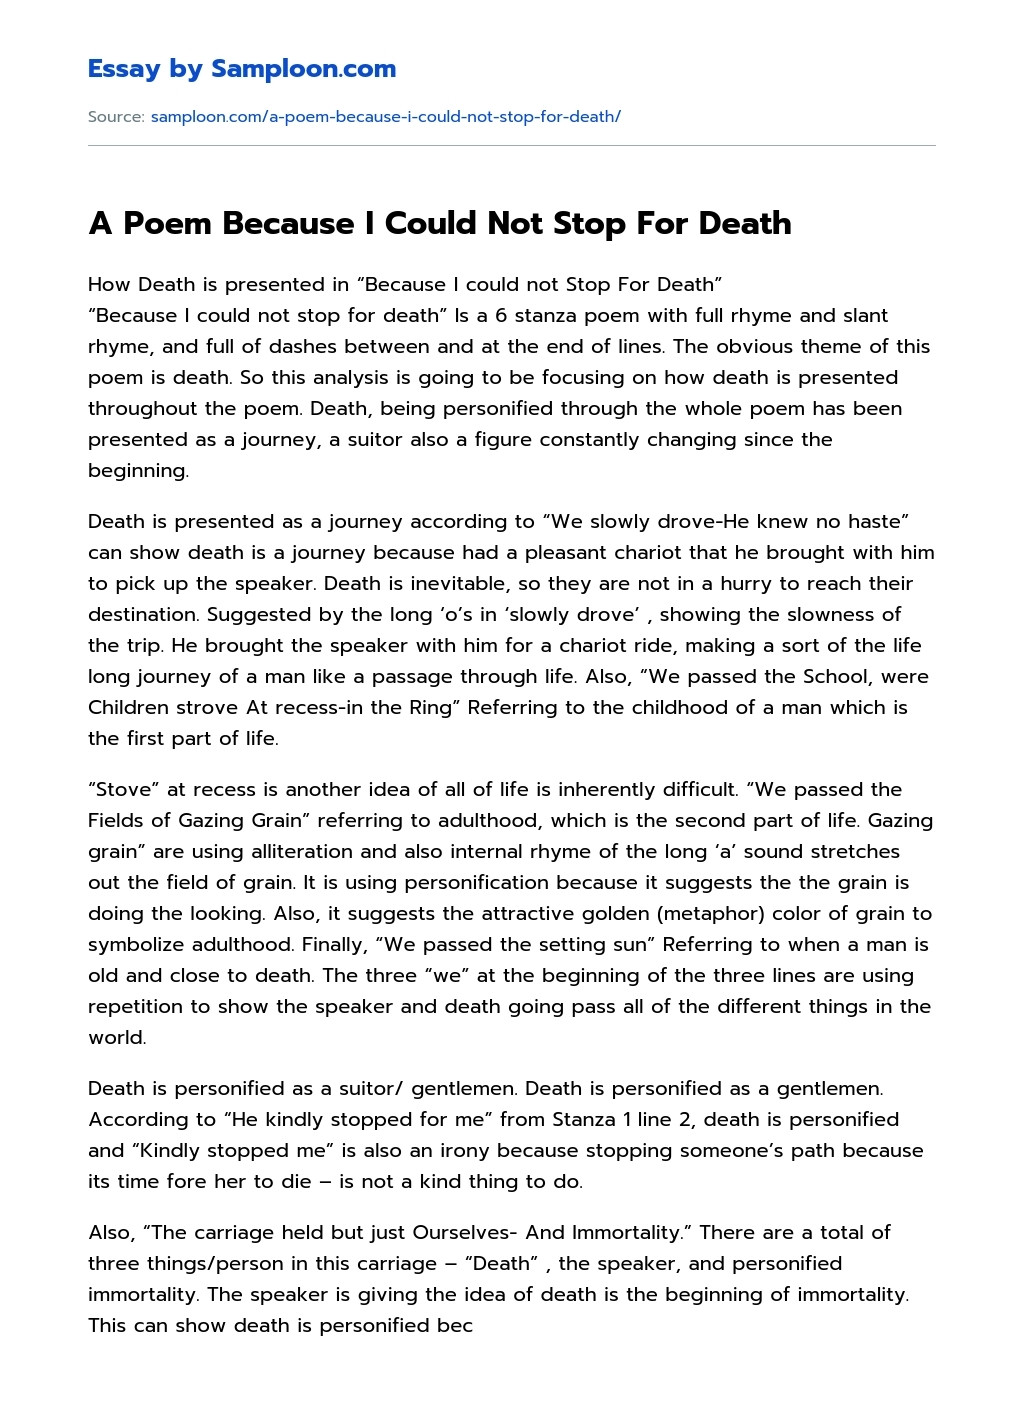 A Poem Because I Could Not Stop For Death Analytical Essay essay